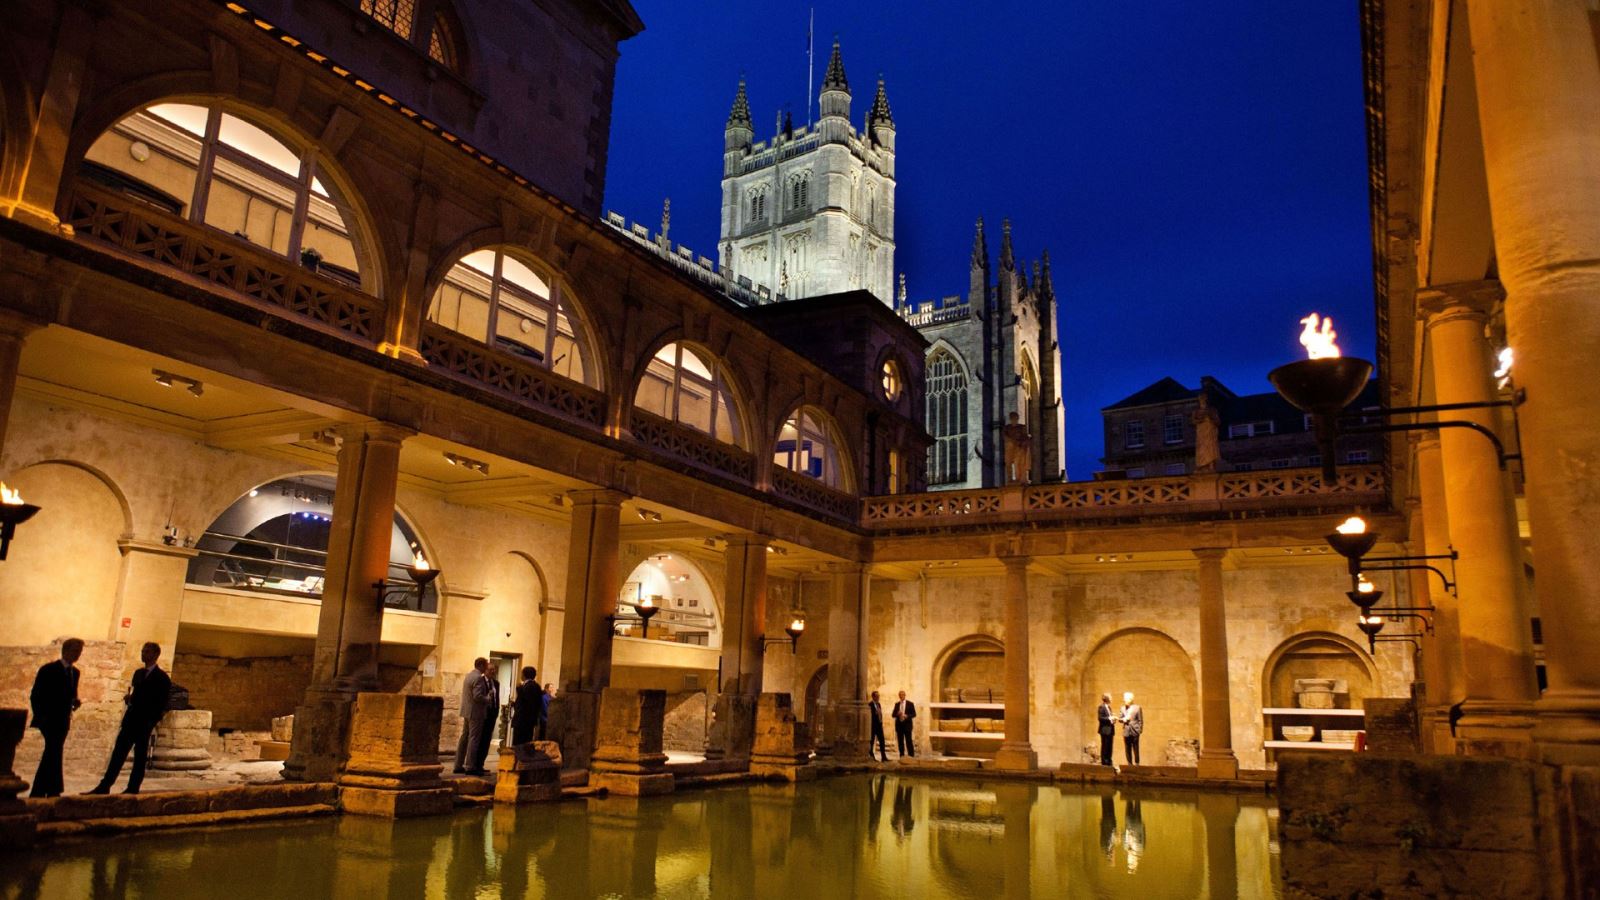 The Roman Baths at night for an event